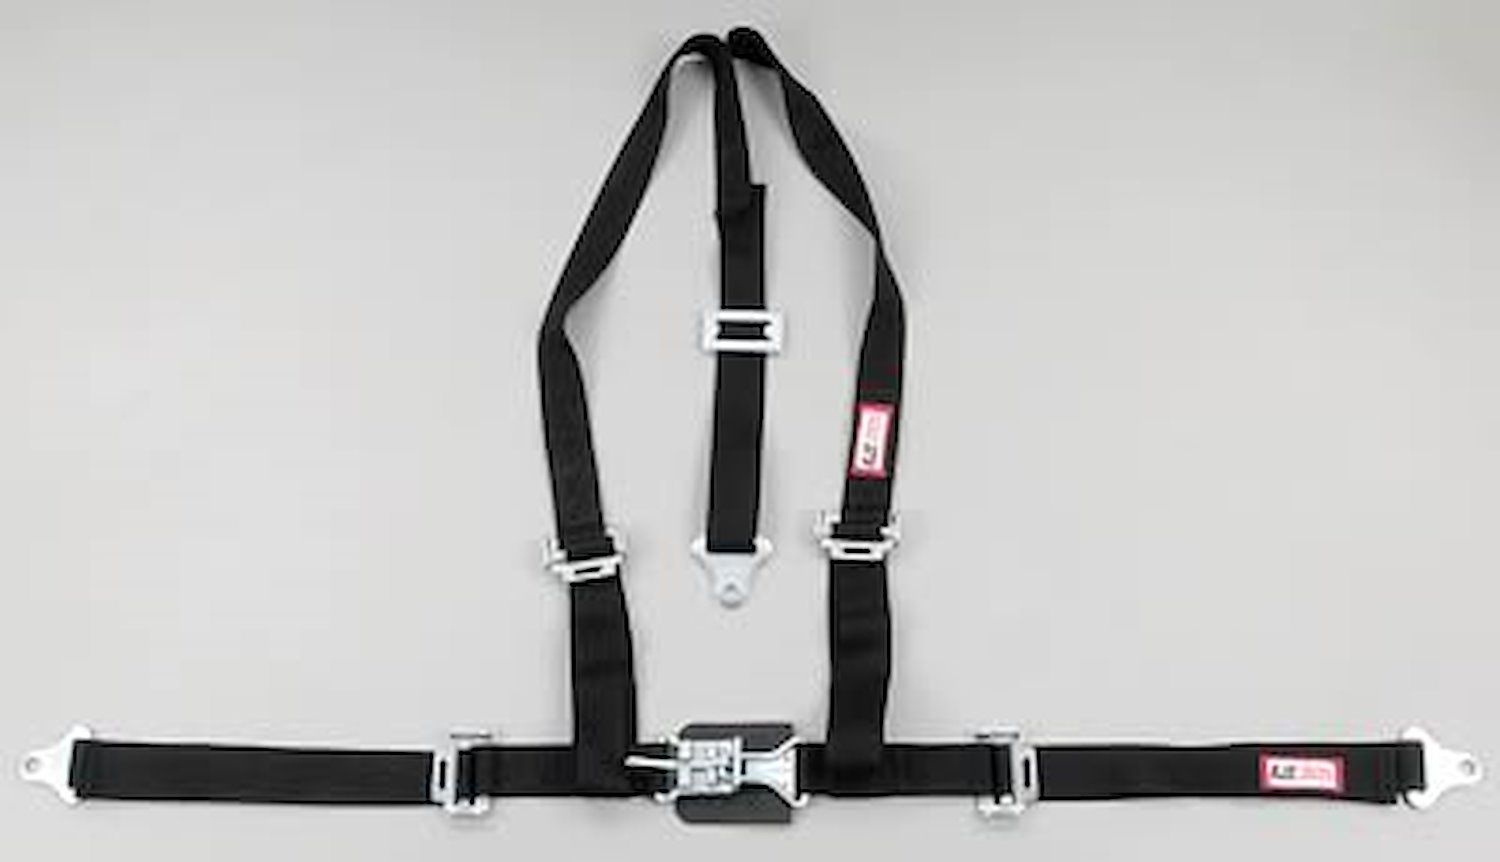 NON-SFI L&L HARNESS 2 PULL UP Lap Belt SEWN IN 2 S.H. INDIVIDUAL FLOOR Mount ALL WRAP ENDS YELLOW